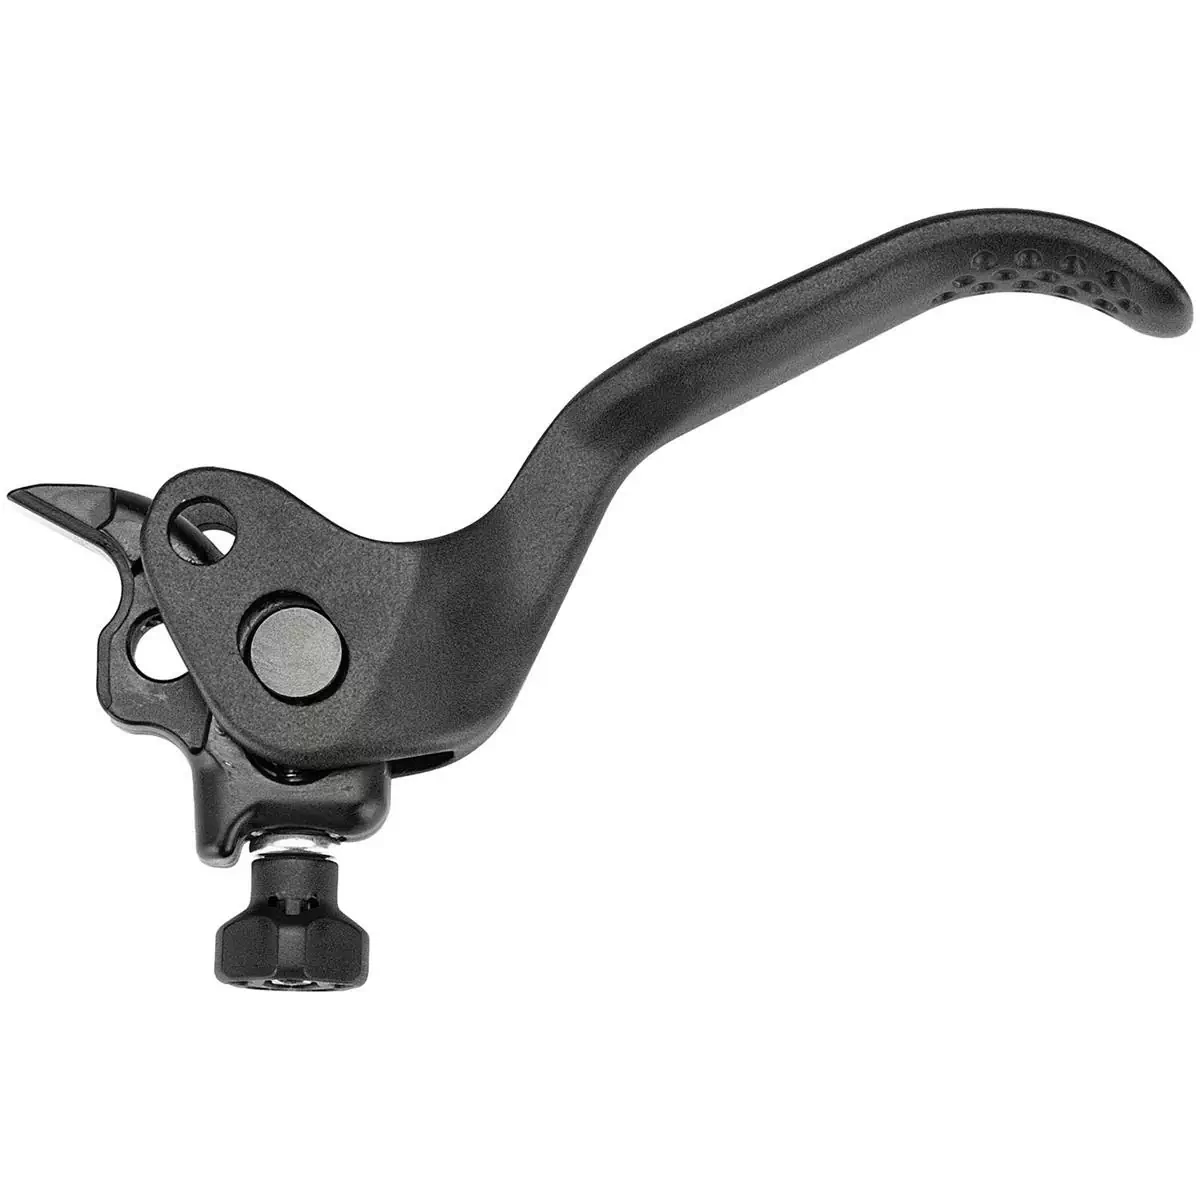 Replacement brake lever left / right XTR BL-M9120 #1